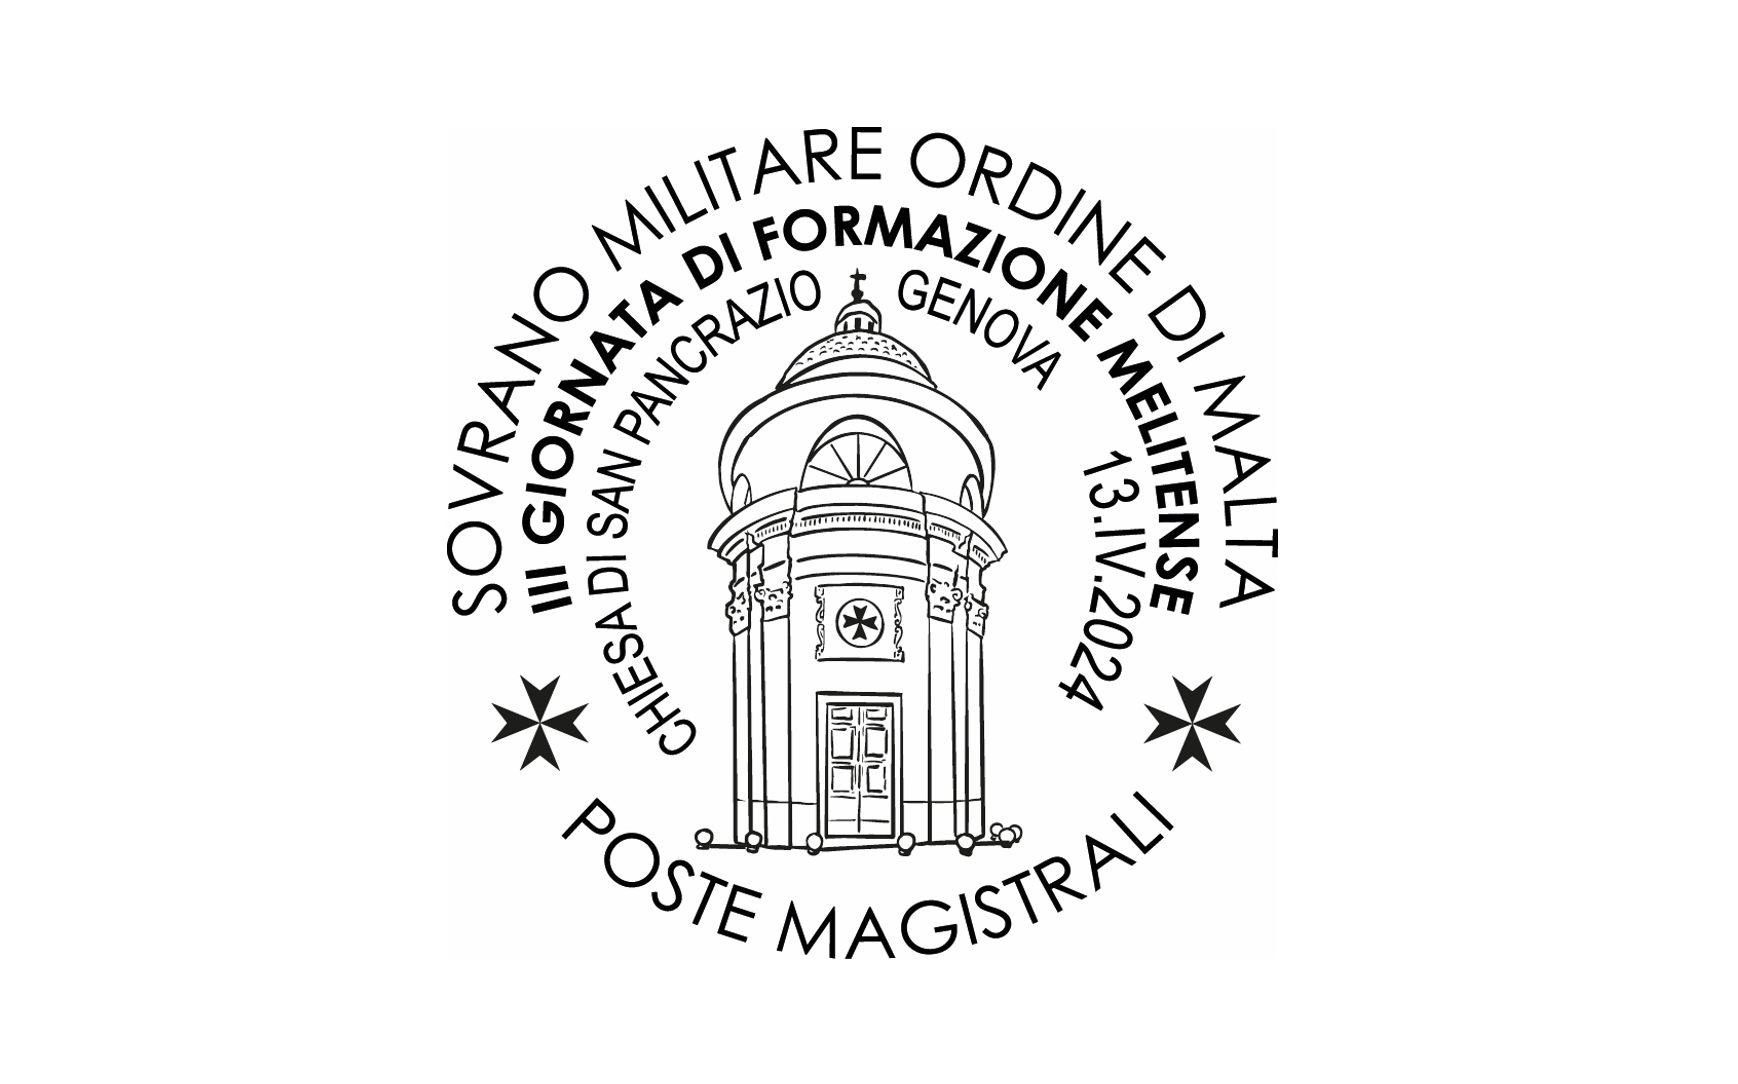 Special postmark – 3rd Training Day of the Order of Malta, Grand Priory of Lombardy and Venice